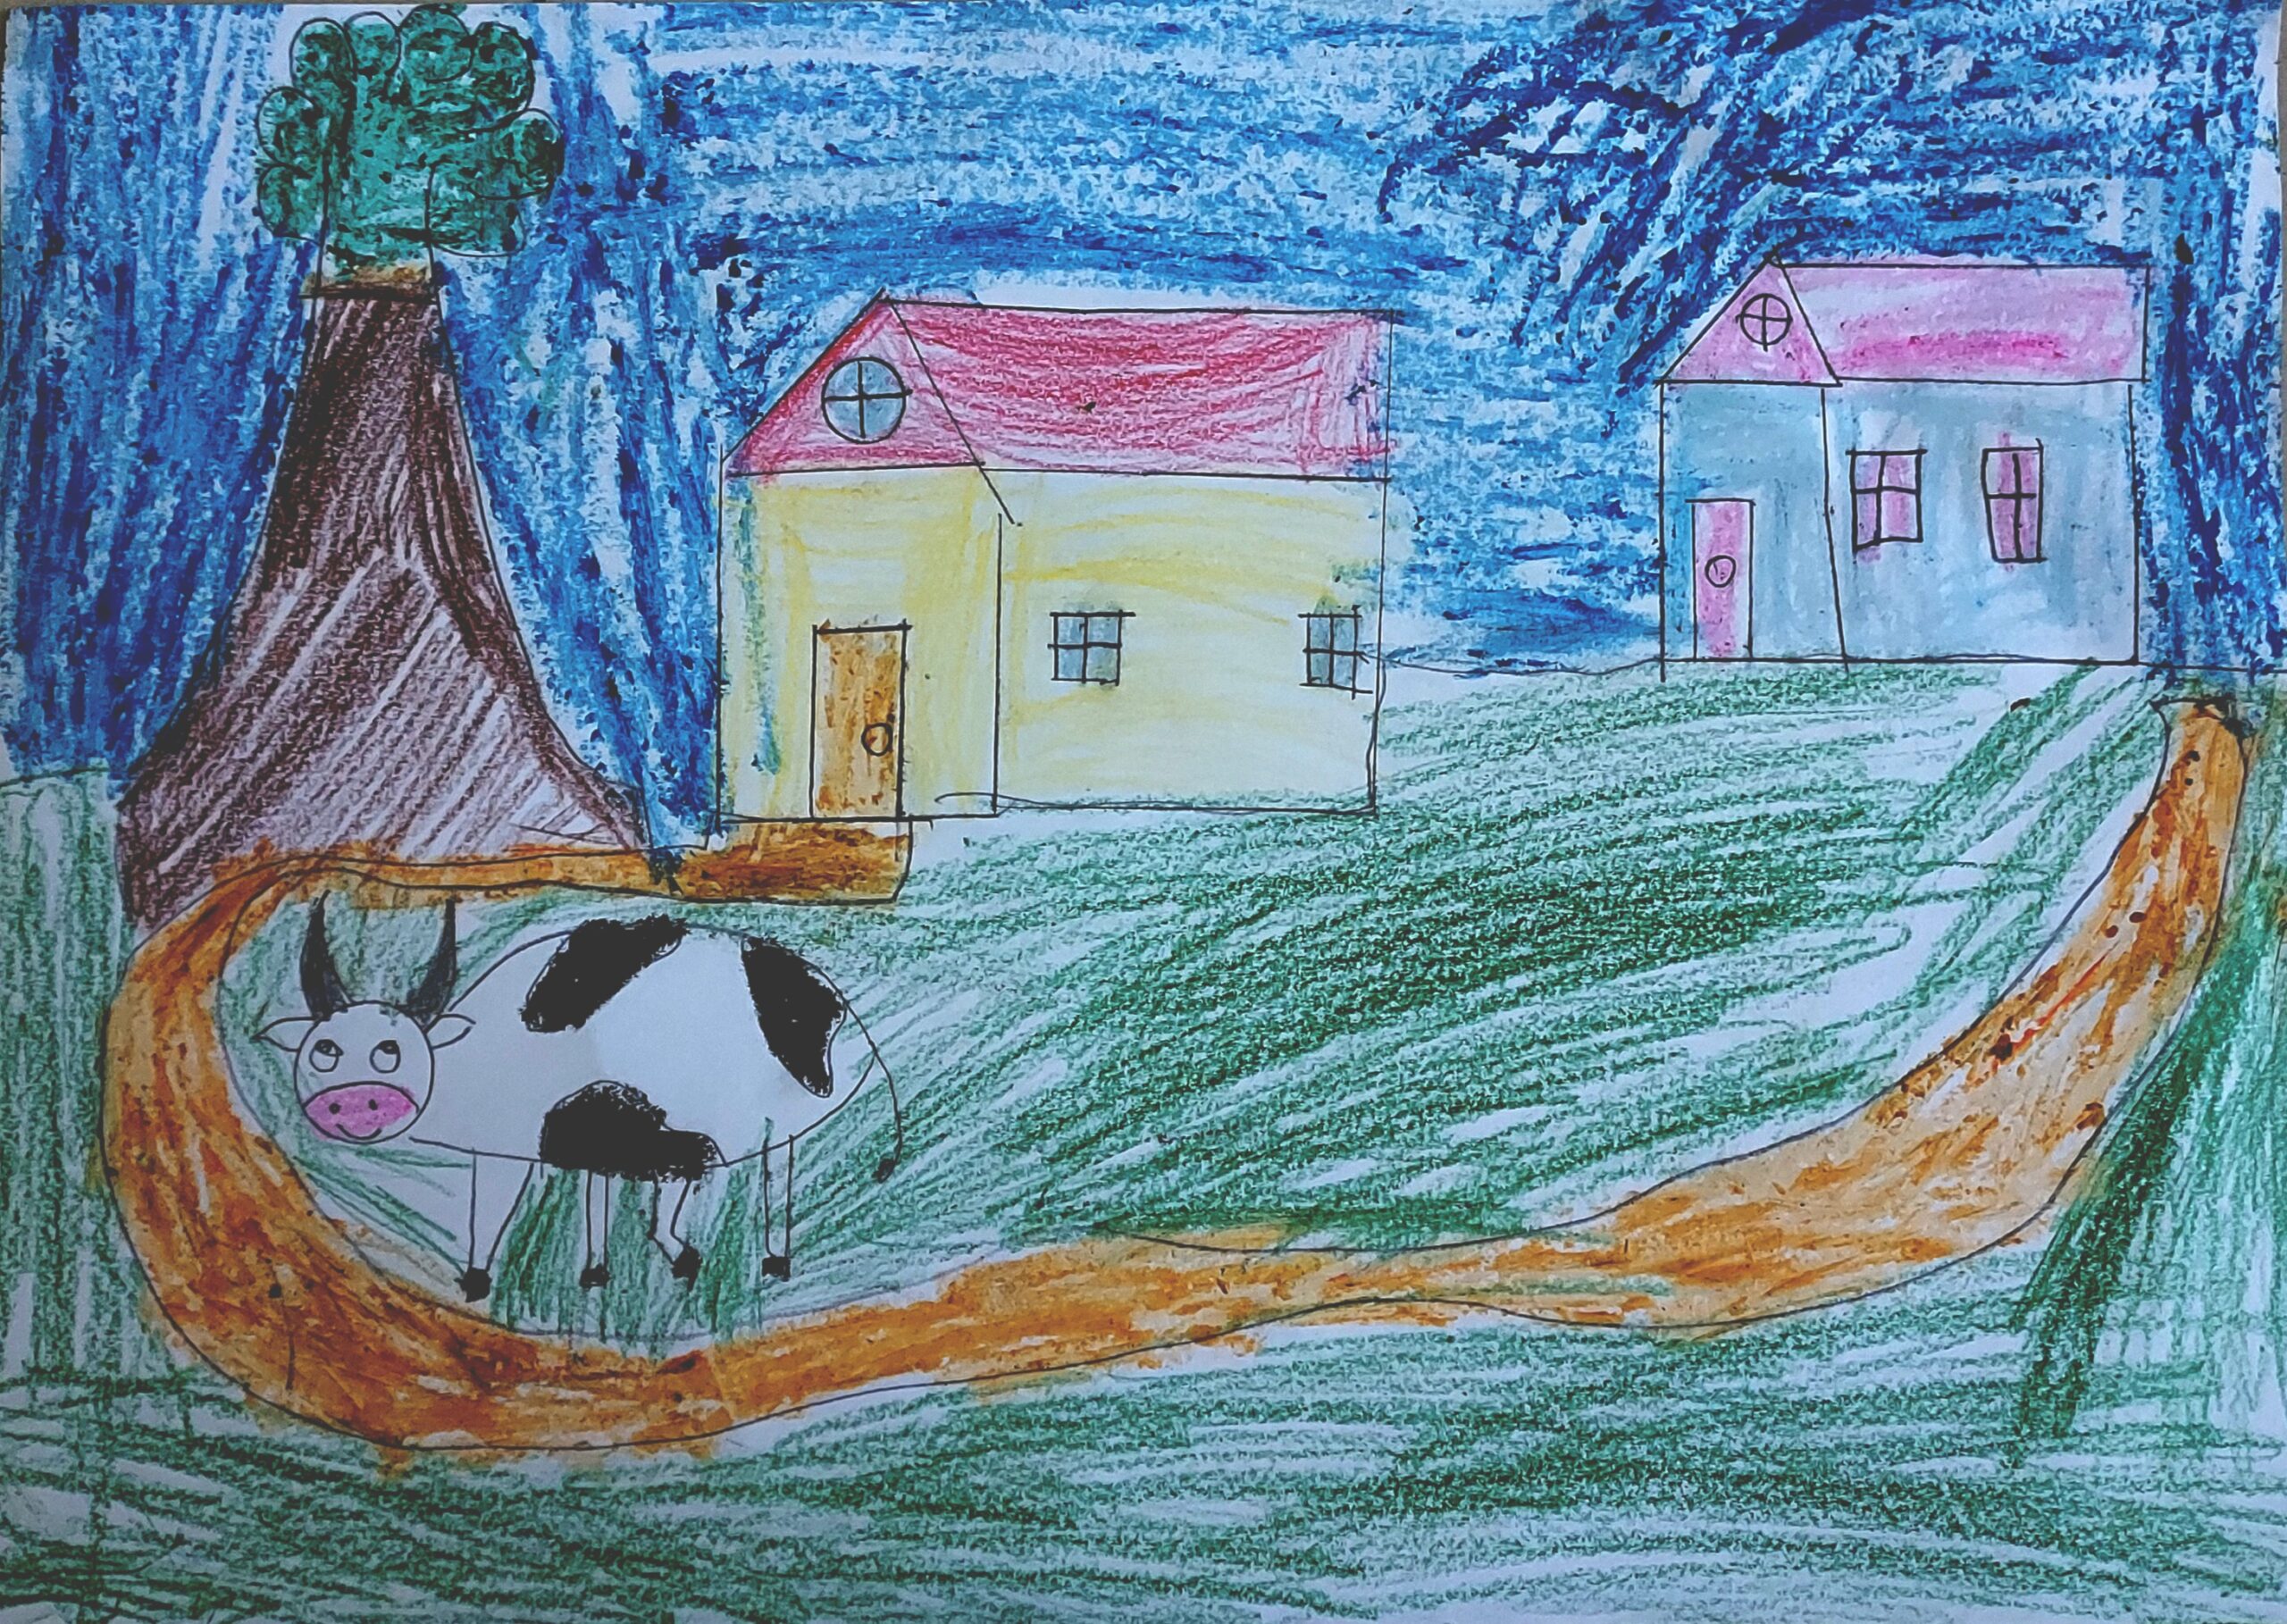 indian village scenery drawing for kids